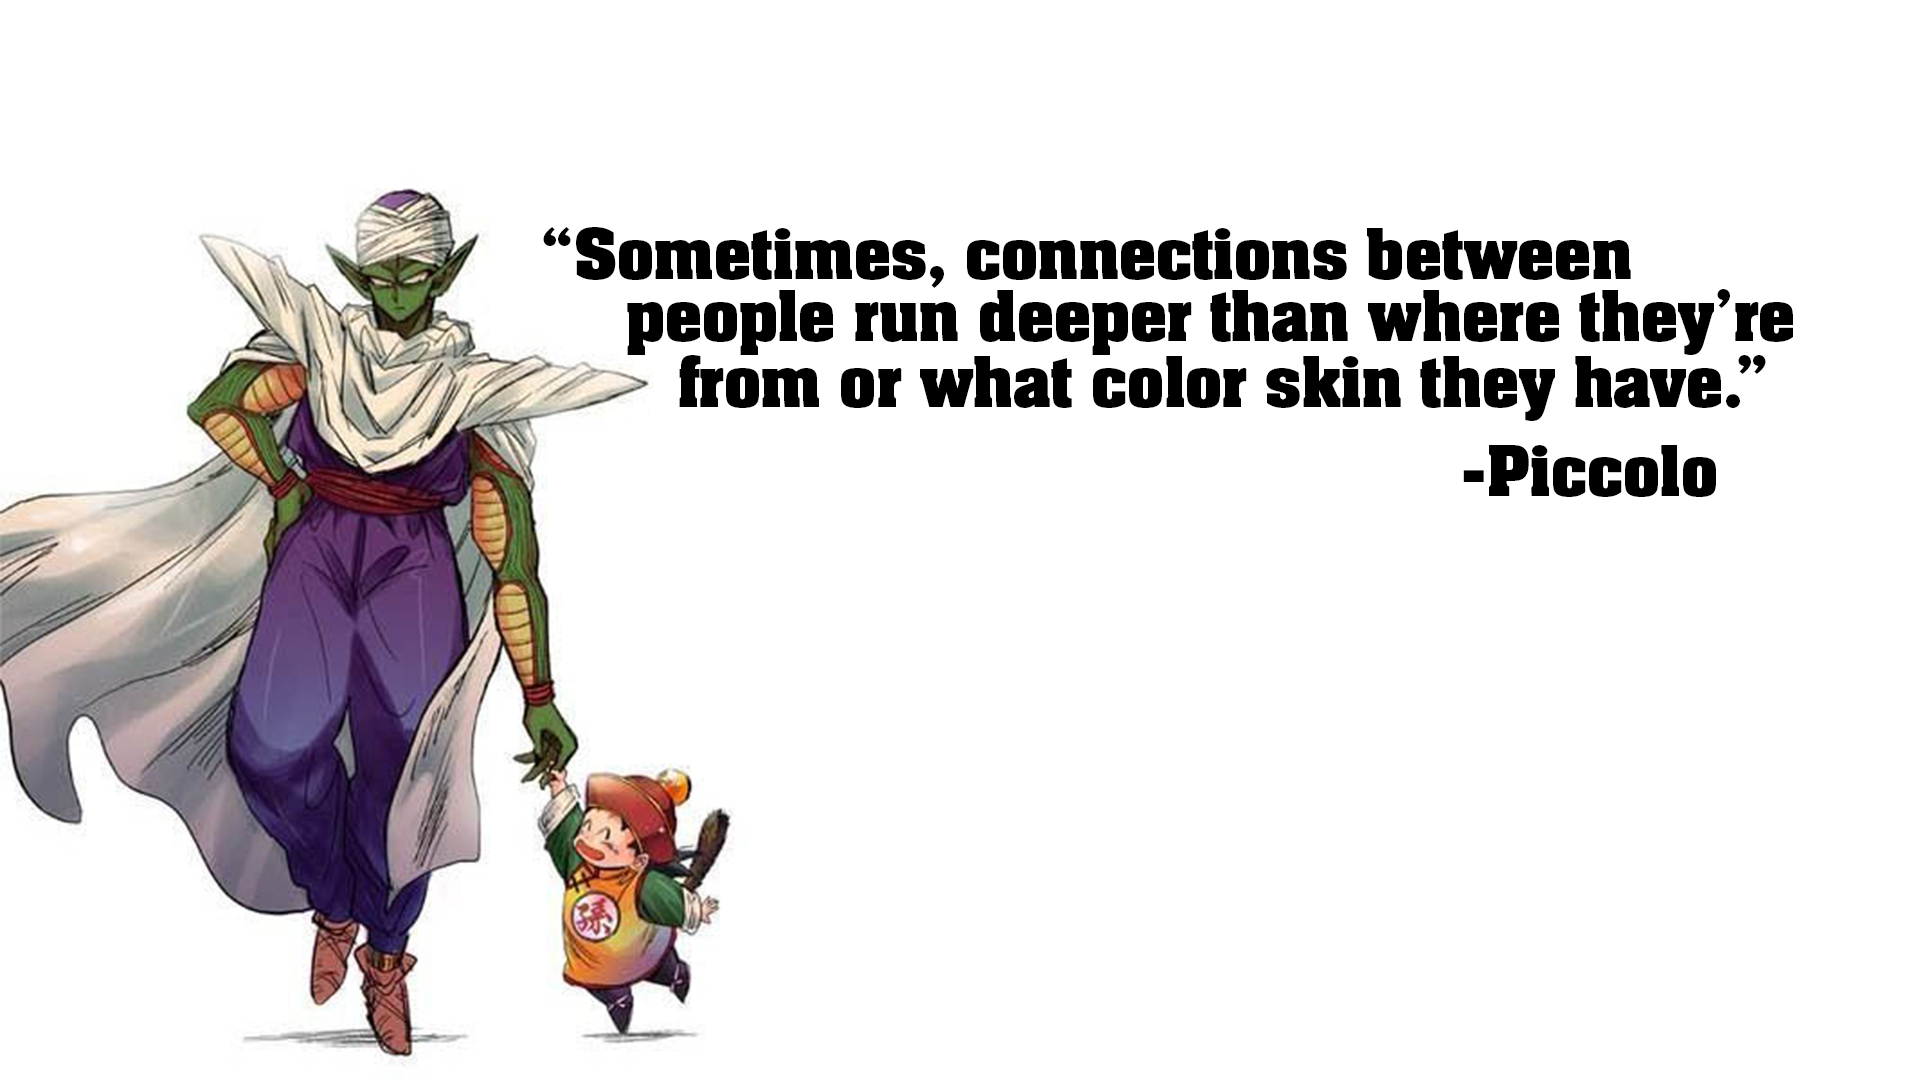 piccolo sangohan - "Sometimes, connections between people run deeper than where they're from or what color skin they have." Piccolo